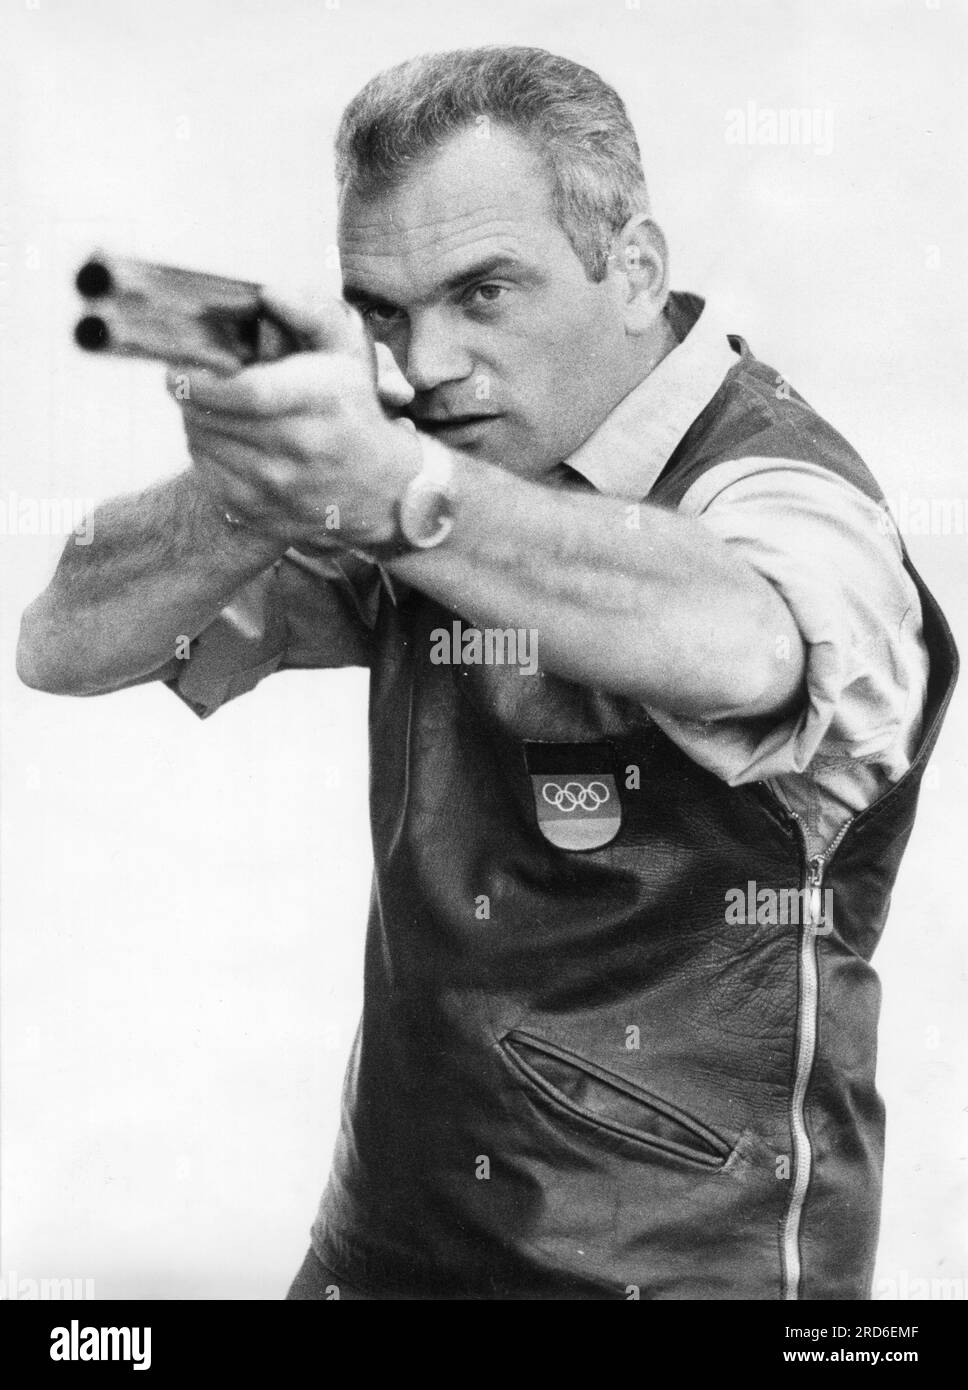 Wirnhier, Konrad 'Conny', 7.7.1937 - 2.6.2002, German sporting marksman, at the Olympic Games, ADDITIONAL-RIGHTS-CLEARANCE-INFO-NOT-AVAILABLE Stock Photo